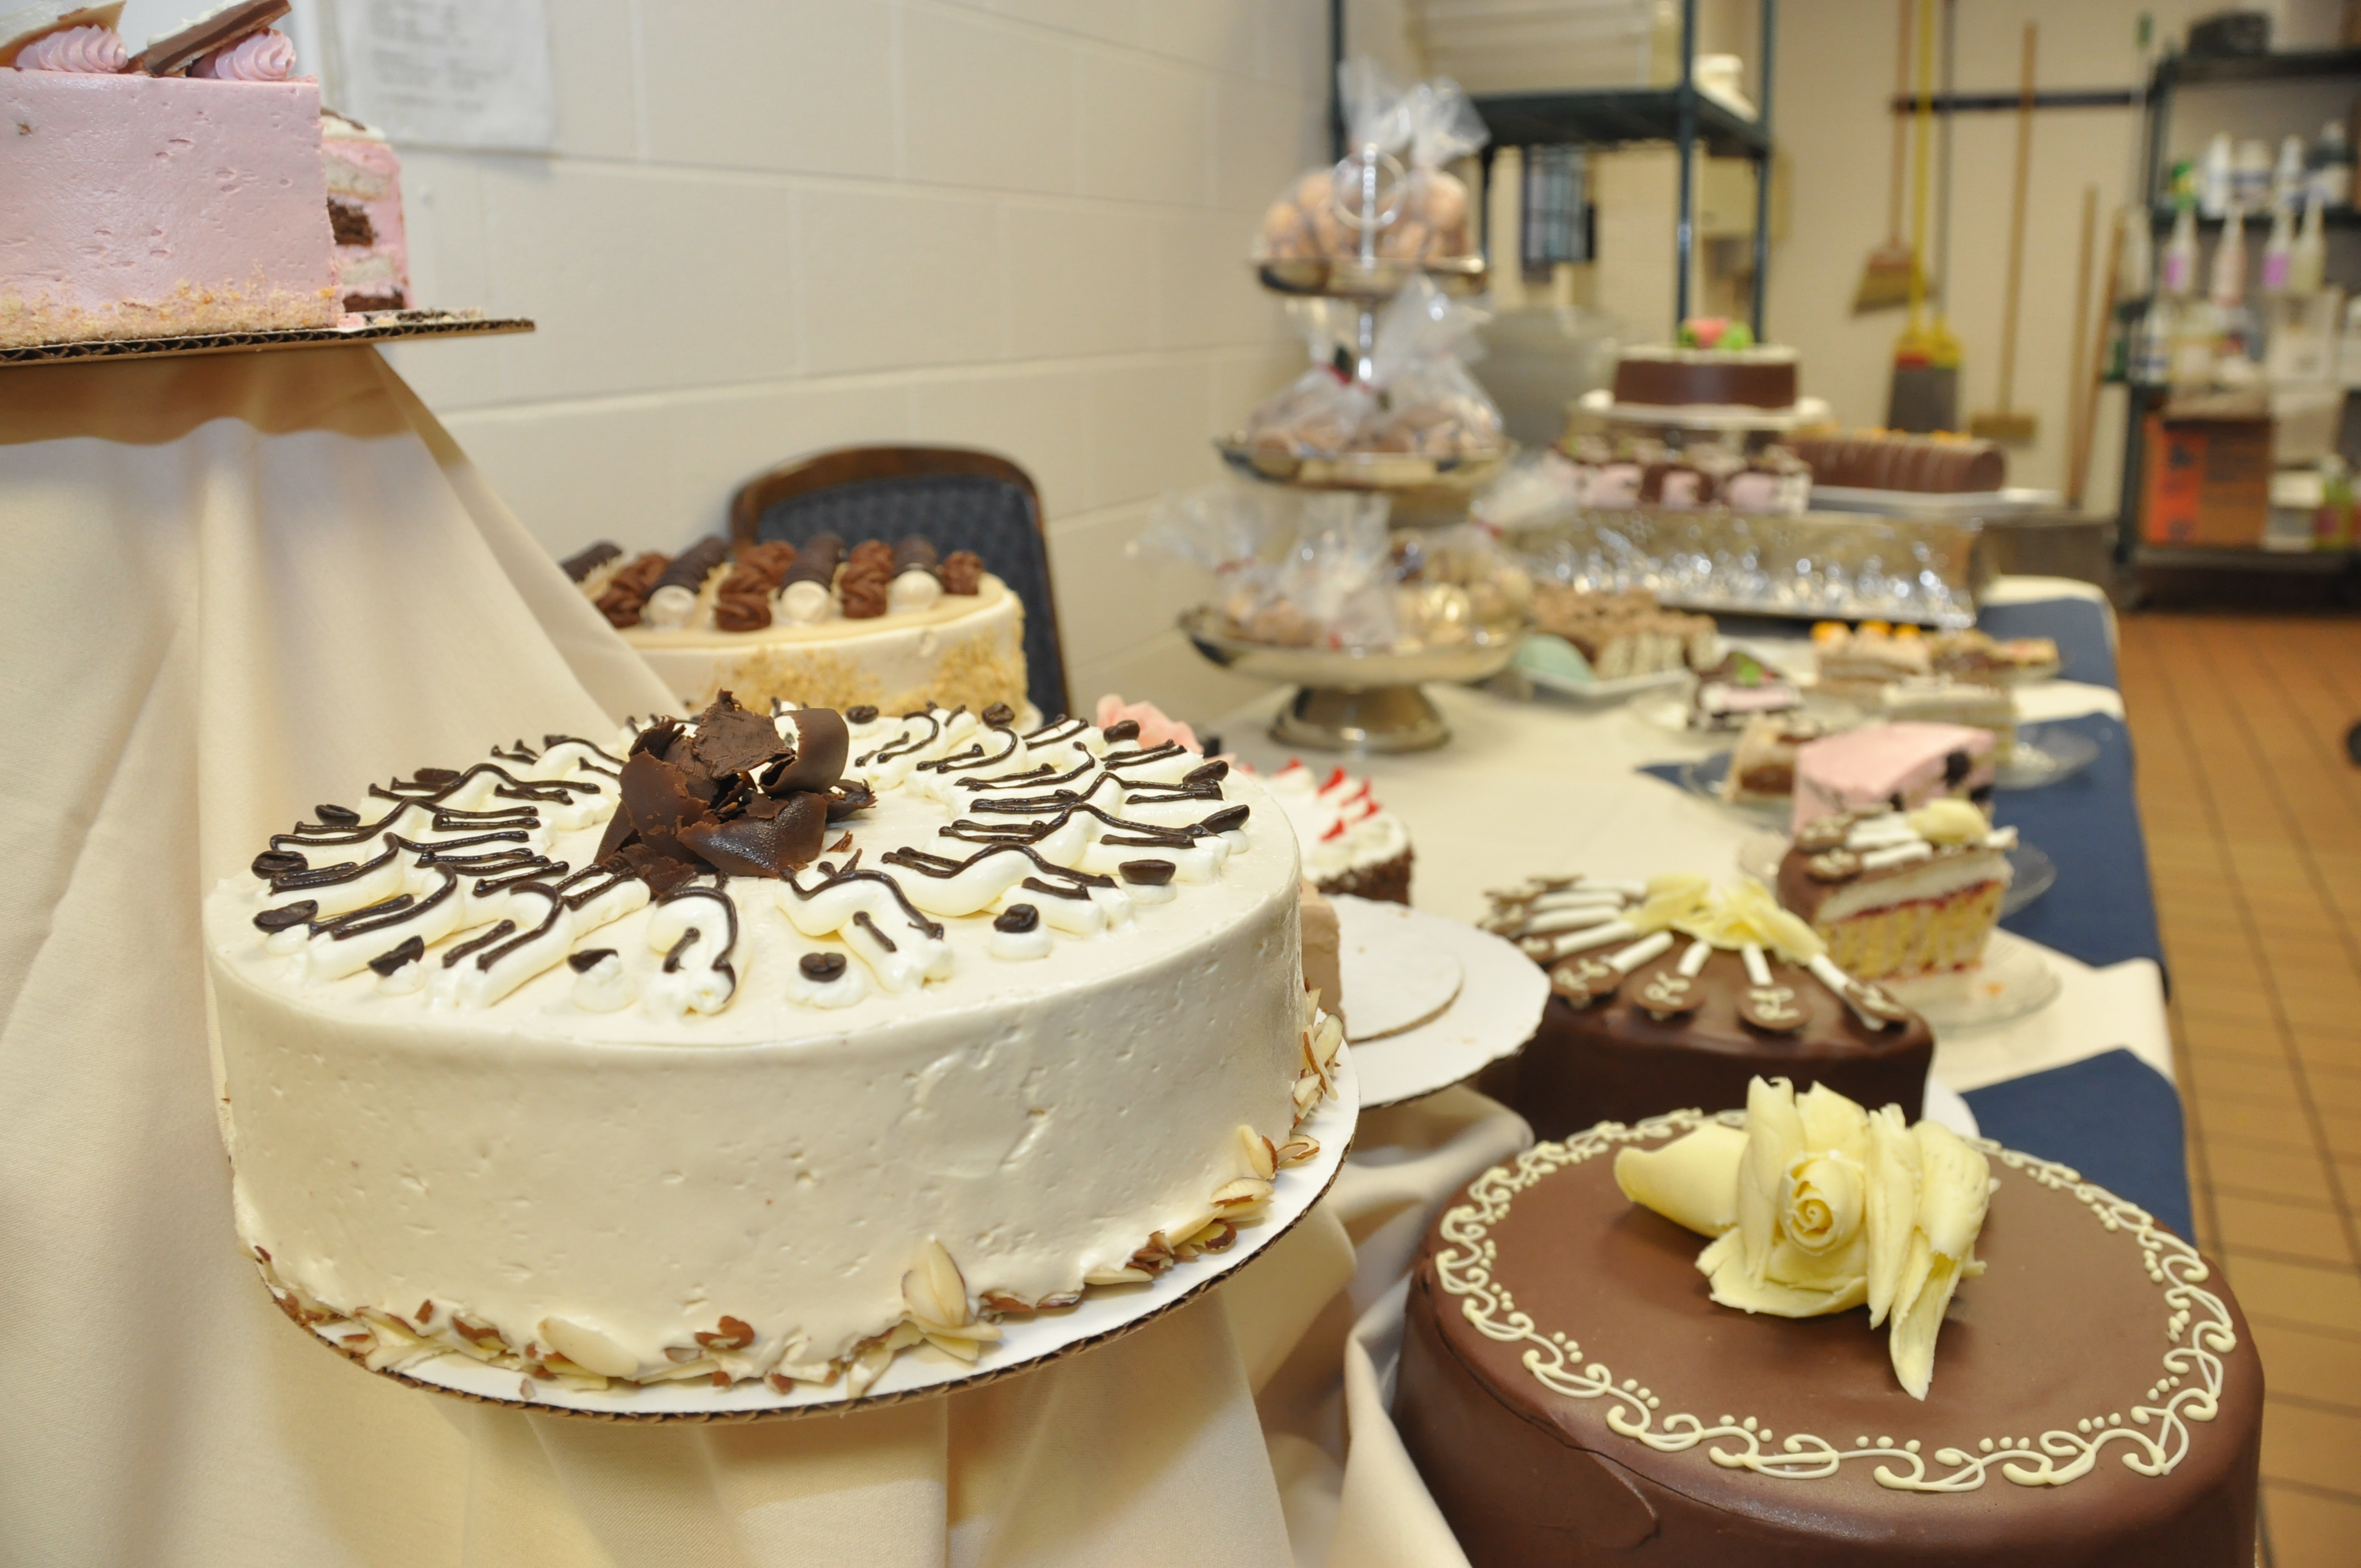 Culinary Arts - Baking and Pastry Arts Concentration (ASCT)